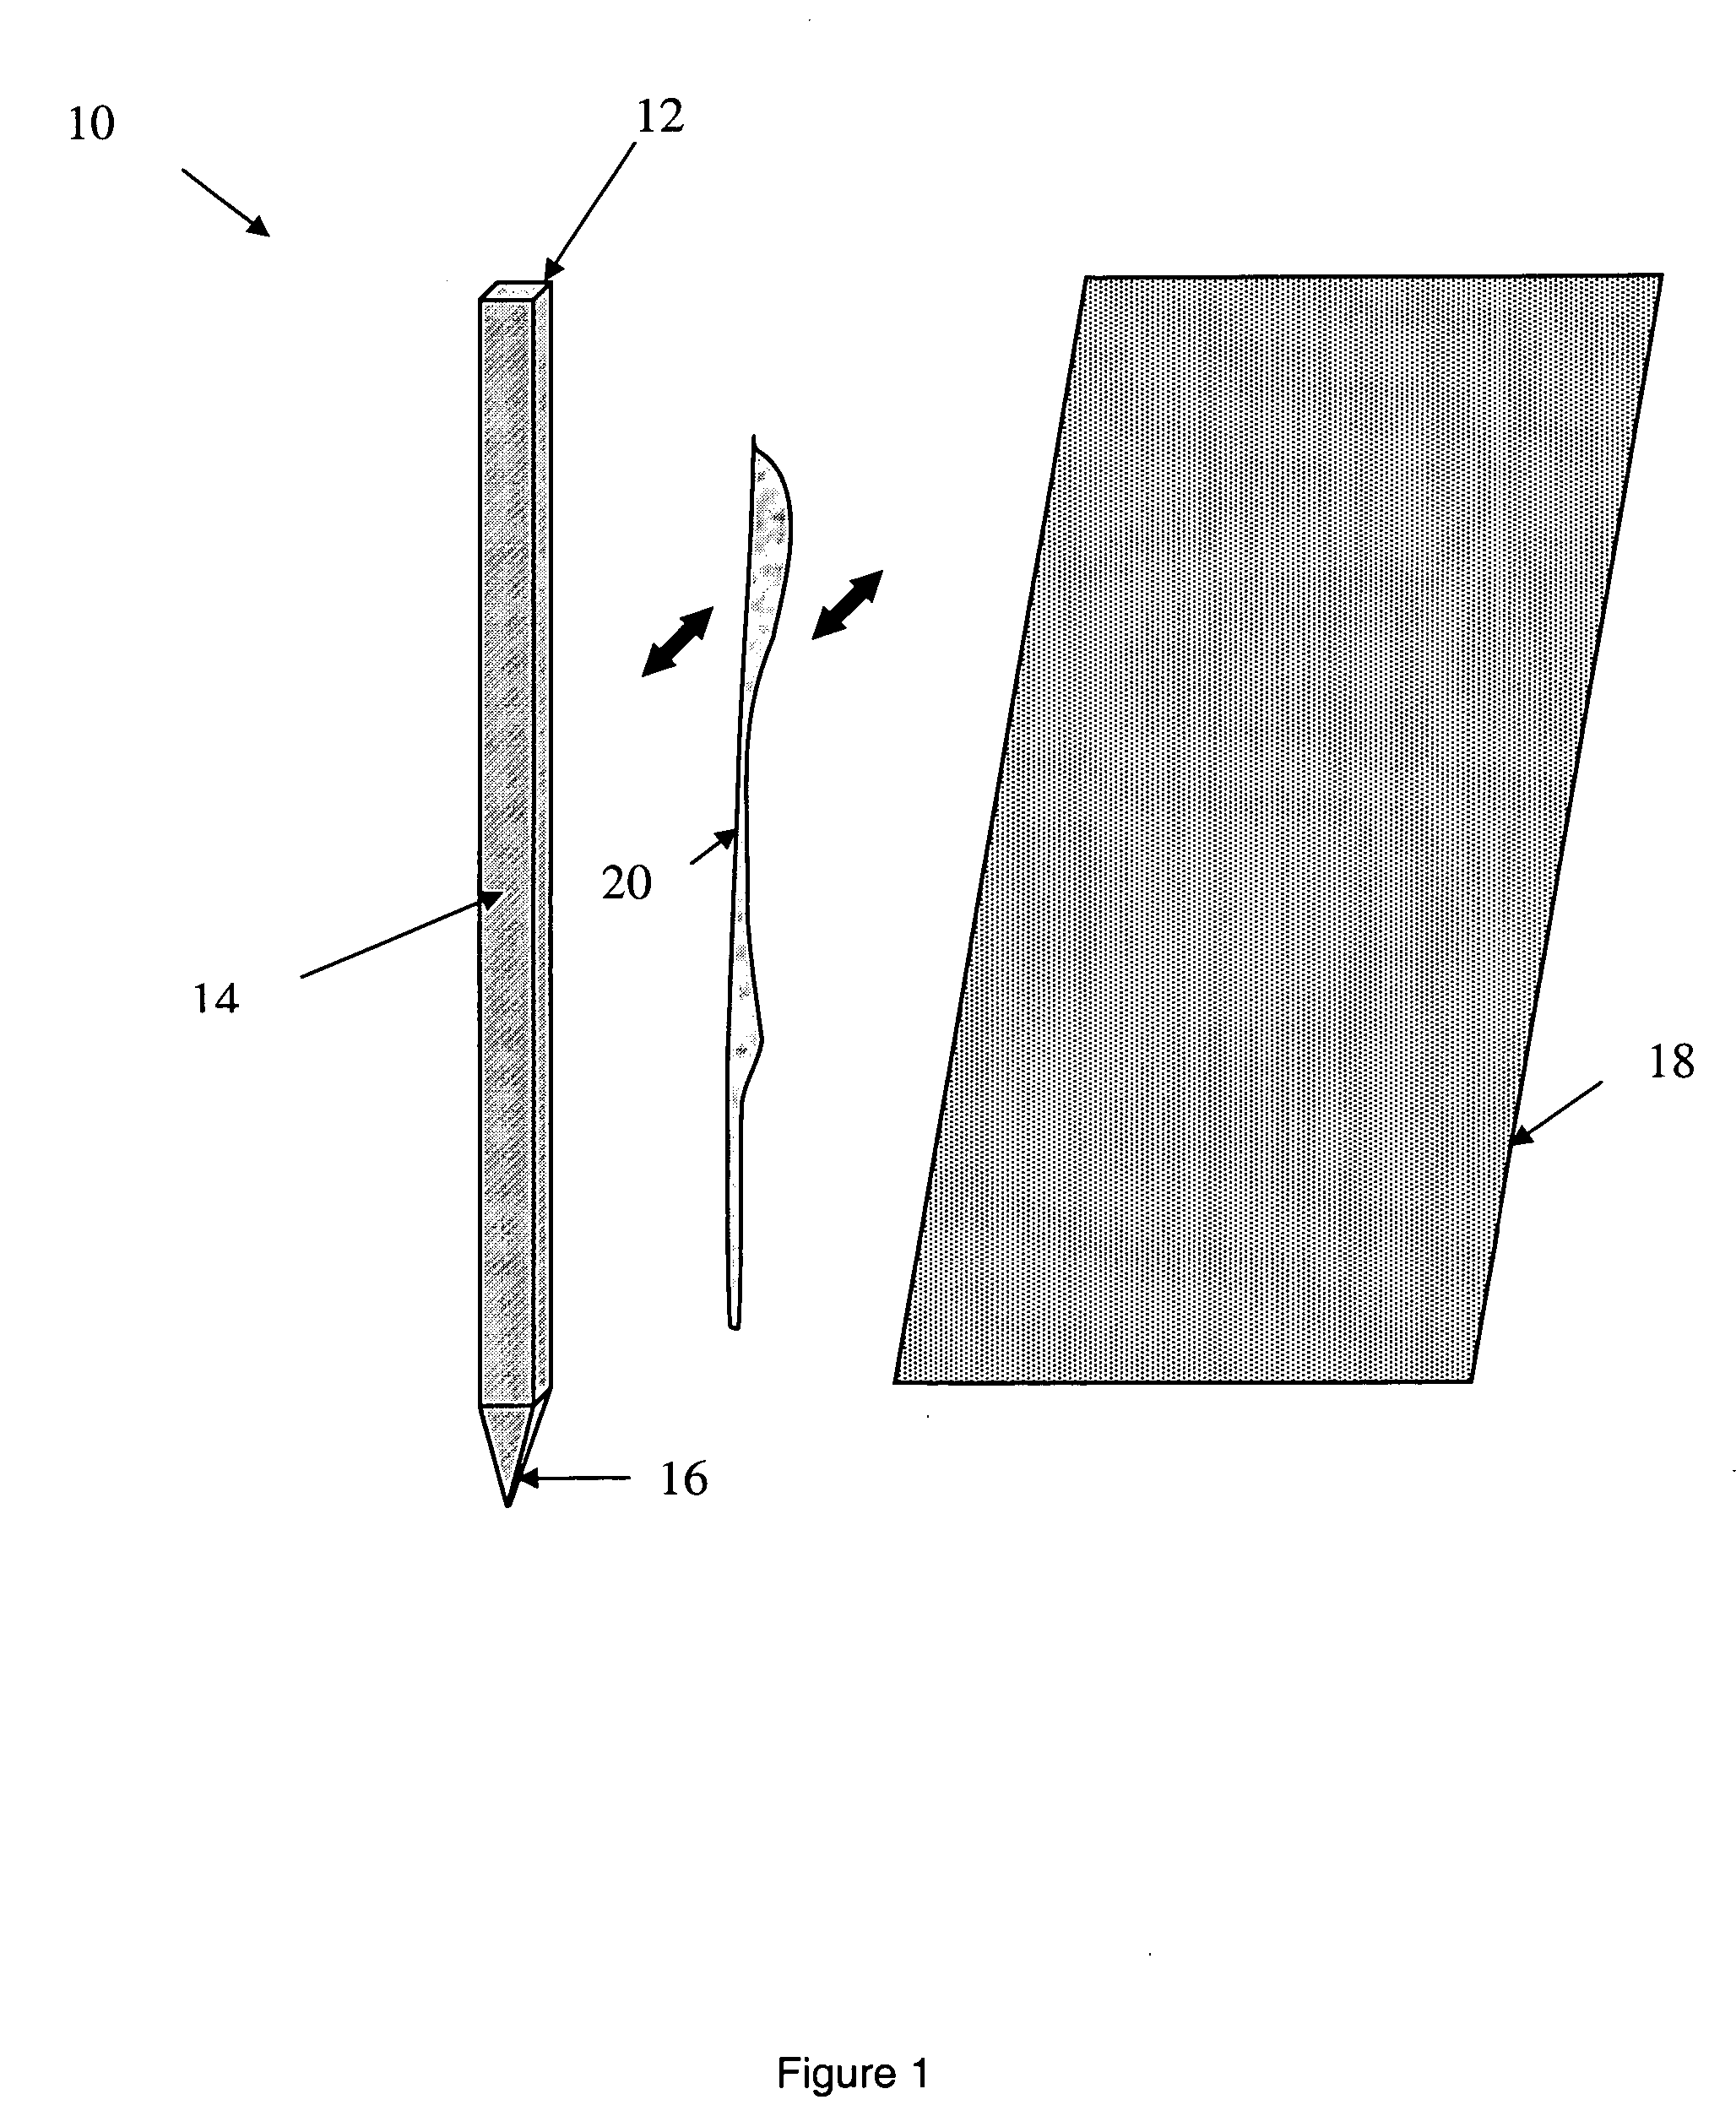 Silt fence apparatus and method of construction